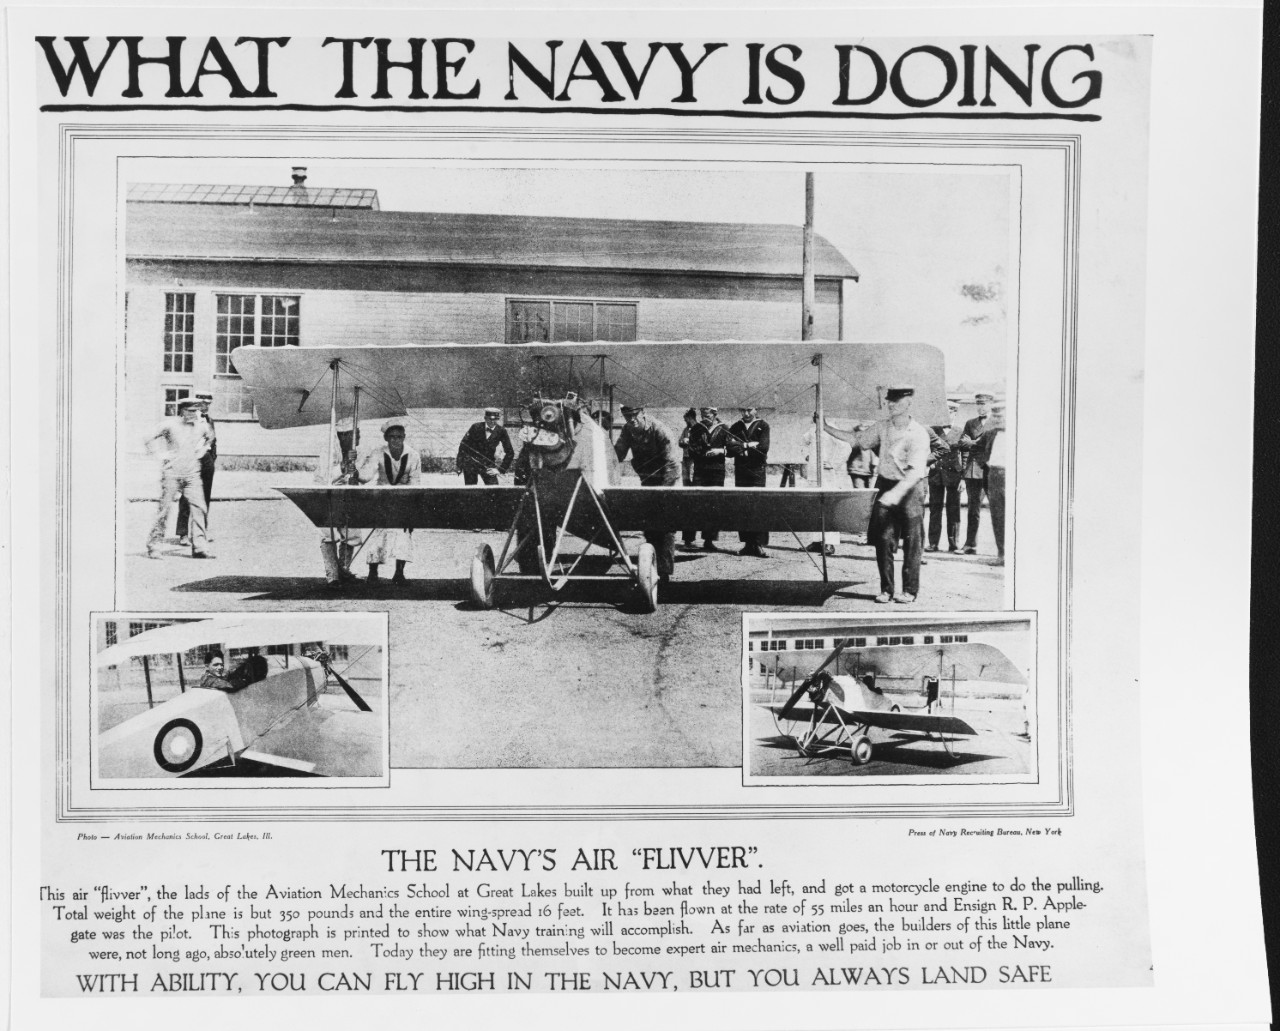 Recruiting Poster: What the Navy is Doing: the Navy's Air Flivver